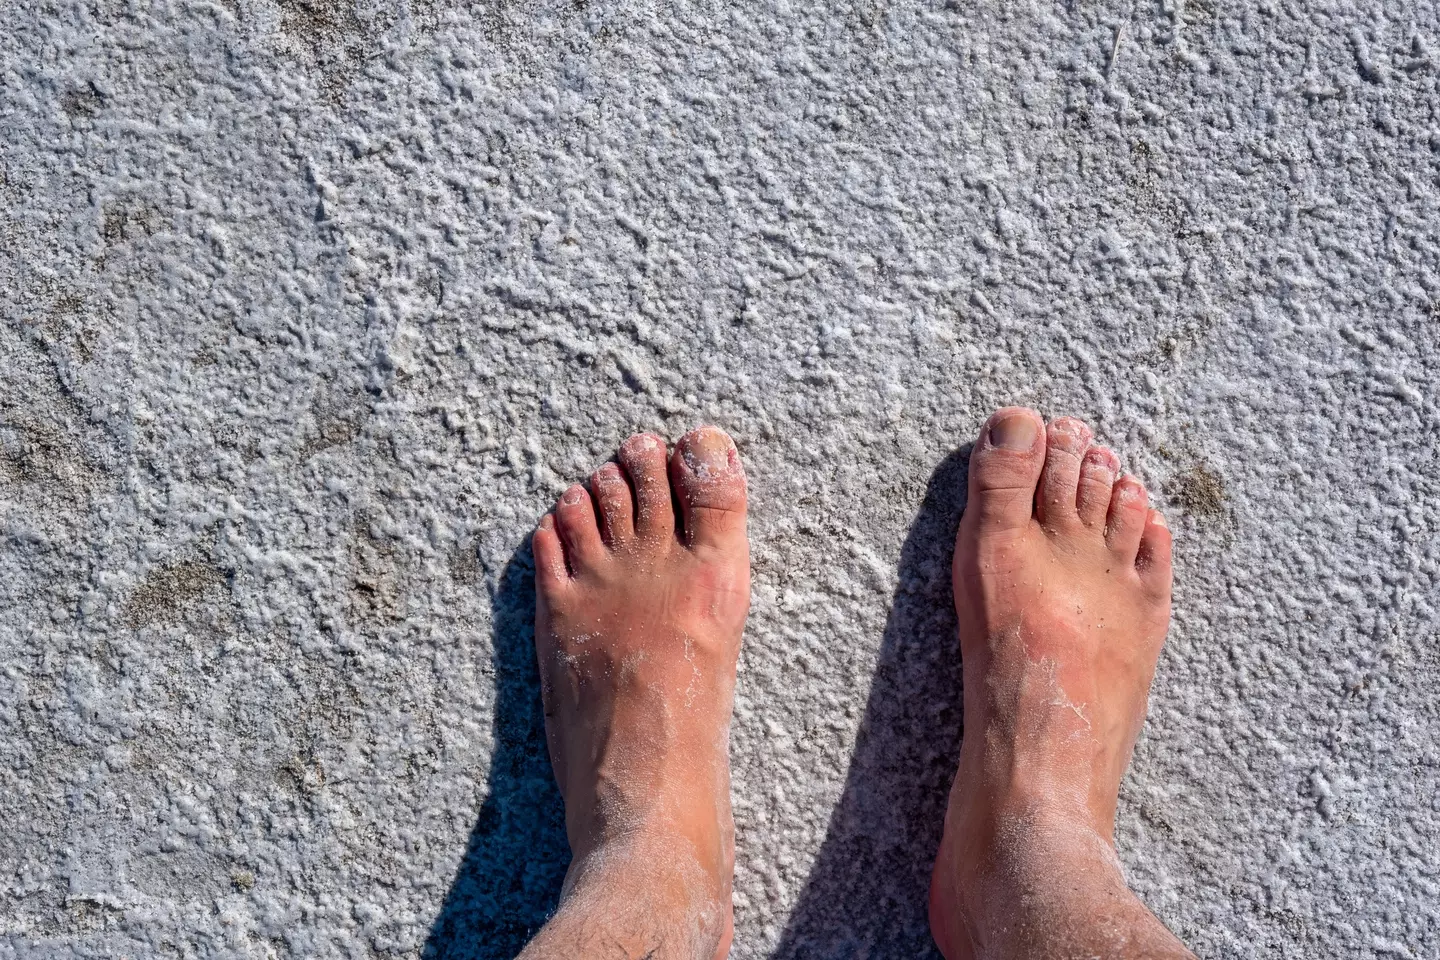 Crusty feet might mean something more than just needed cream. (Getty Stock)